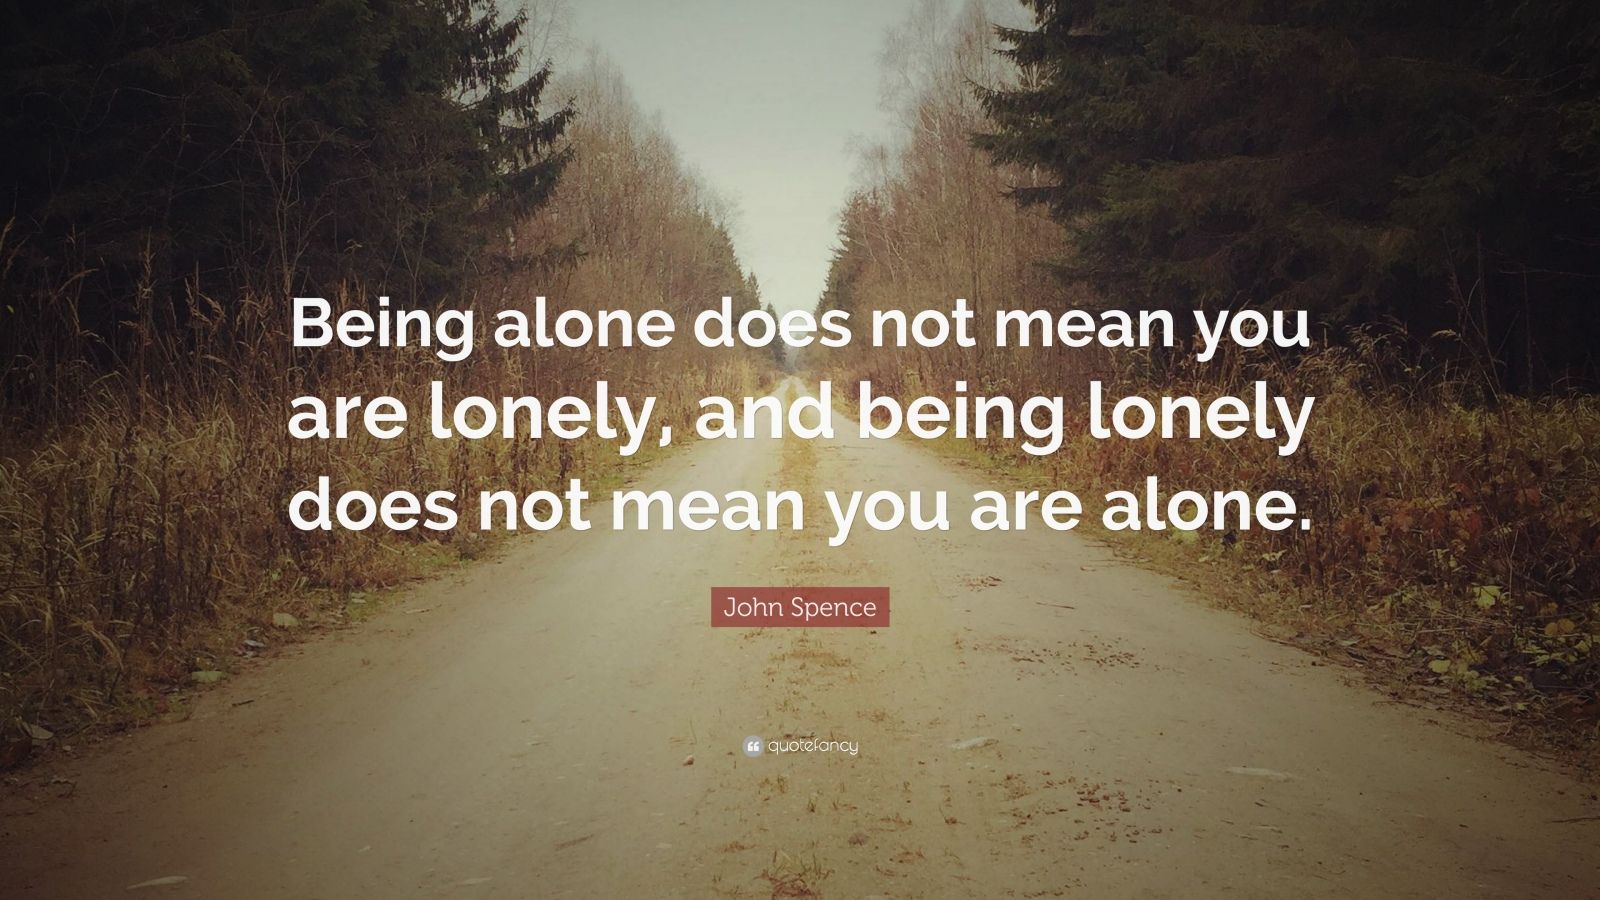 John Spence Quote: “Being alone does not mean you are lonely, and being ...